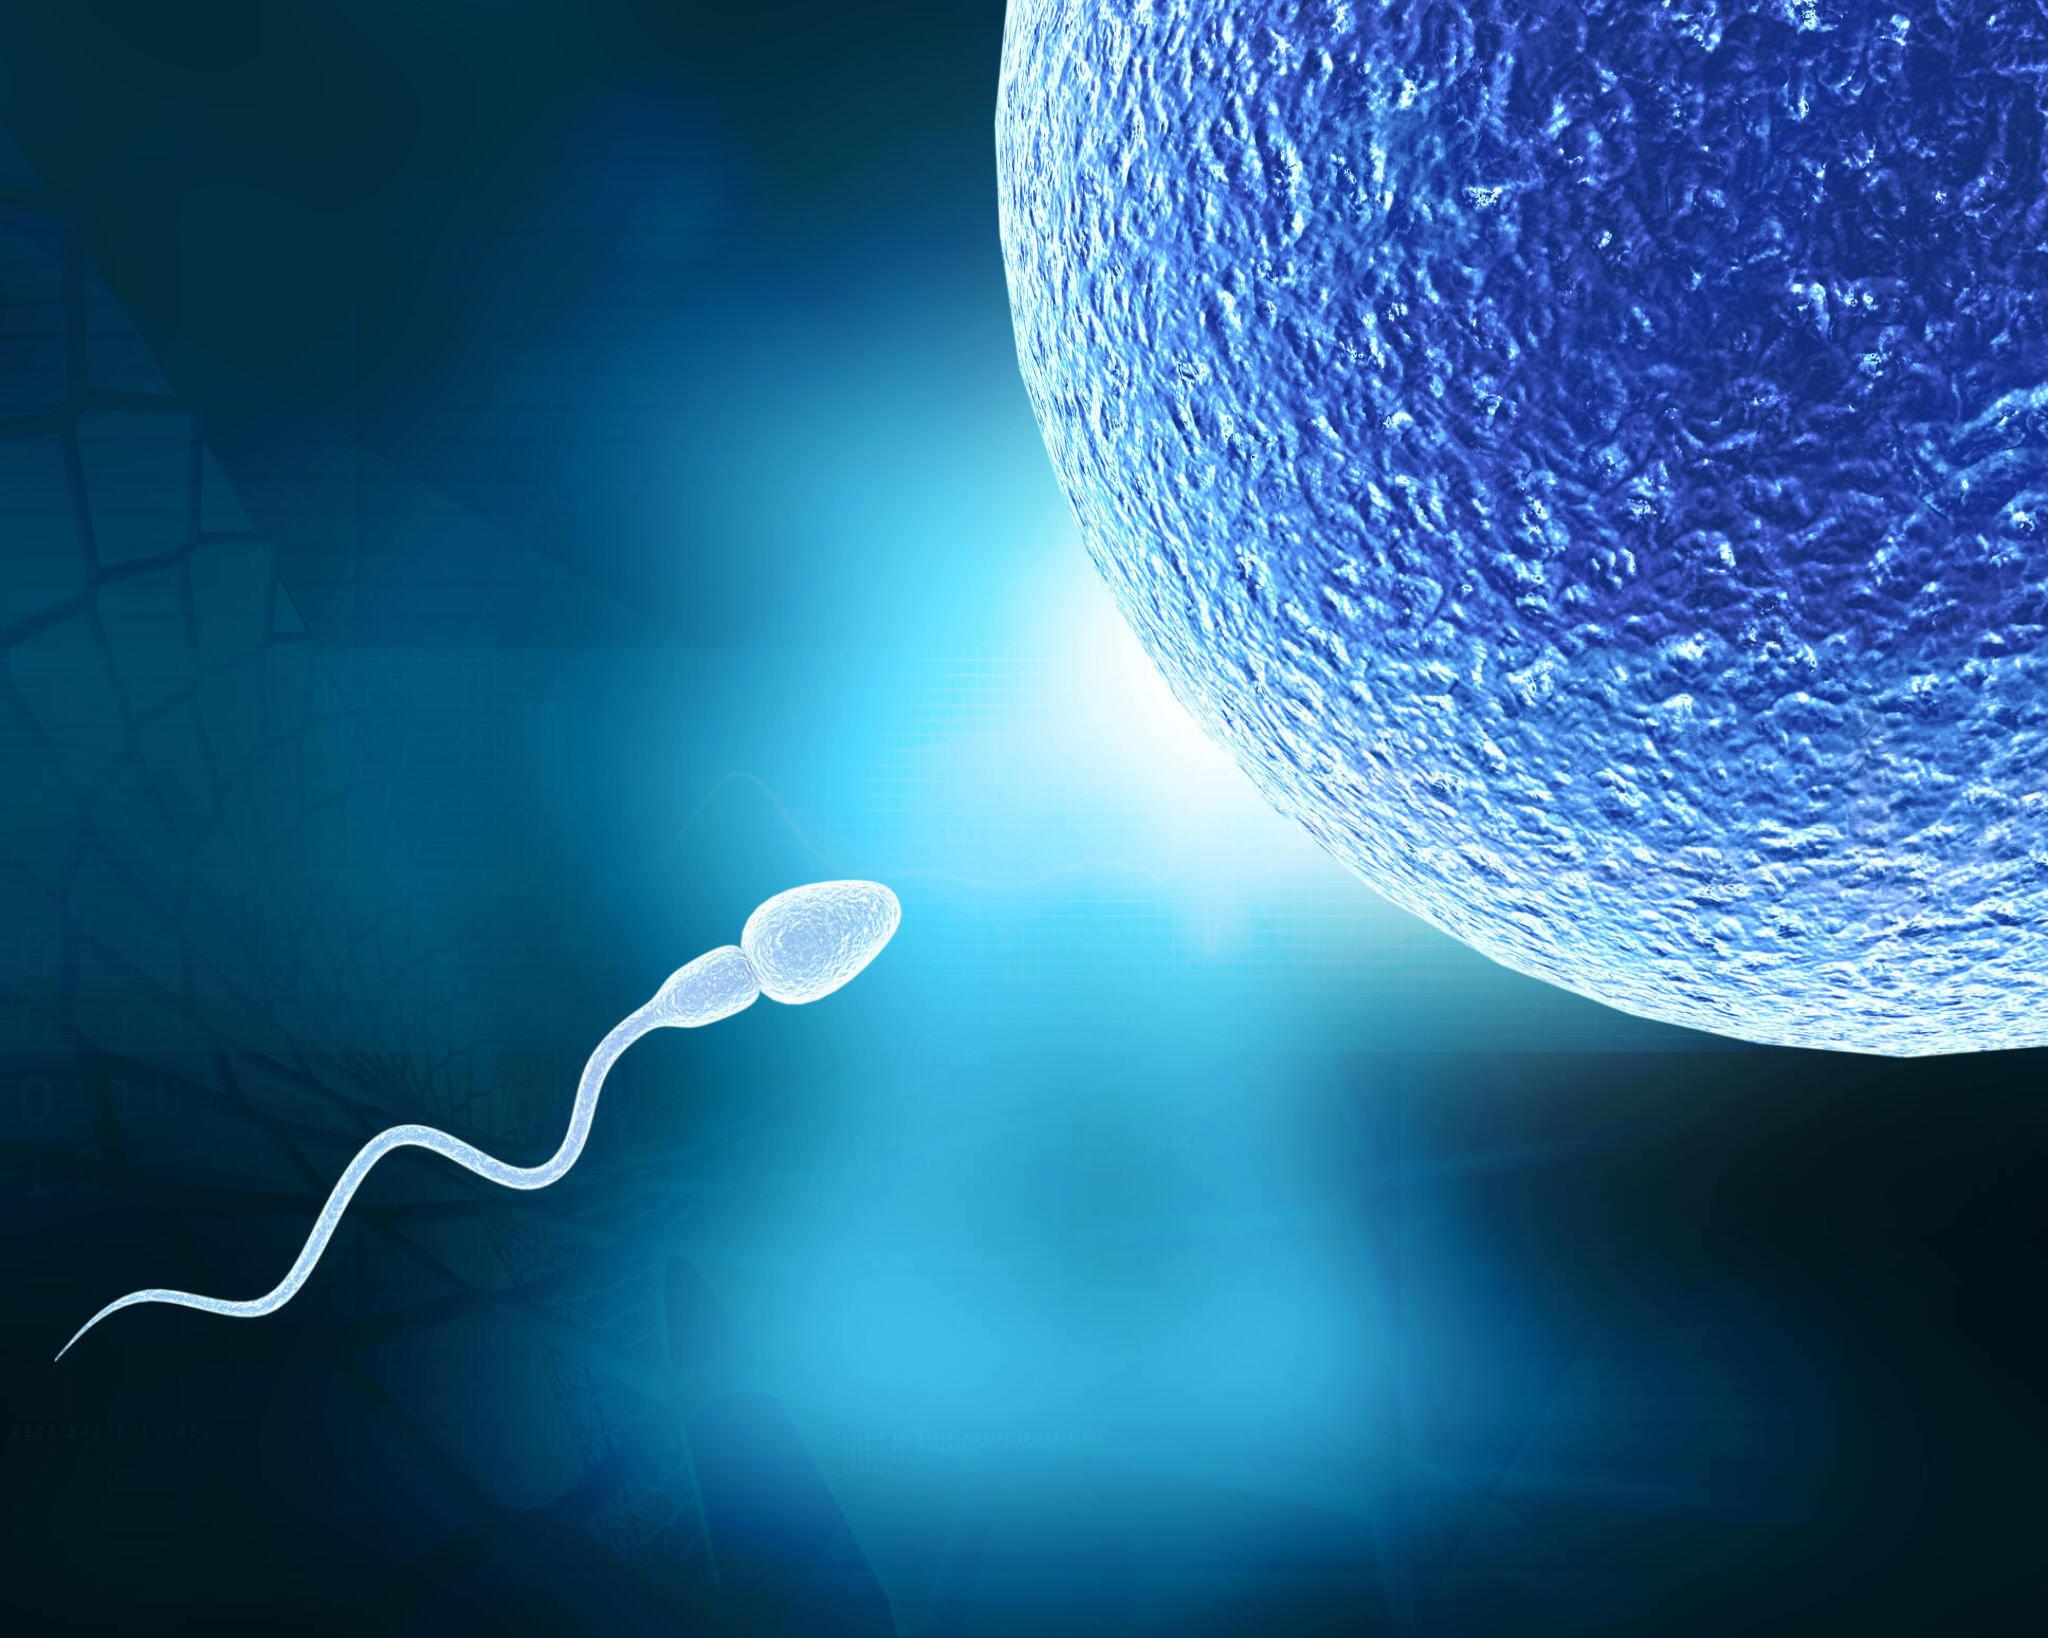 Best IVF center in Delhi with proven success rates